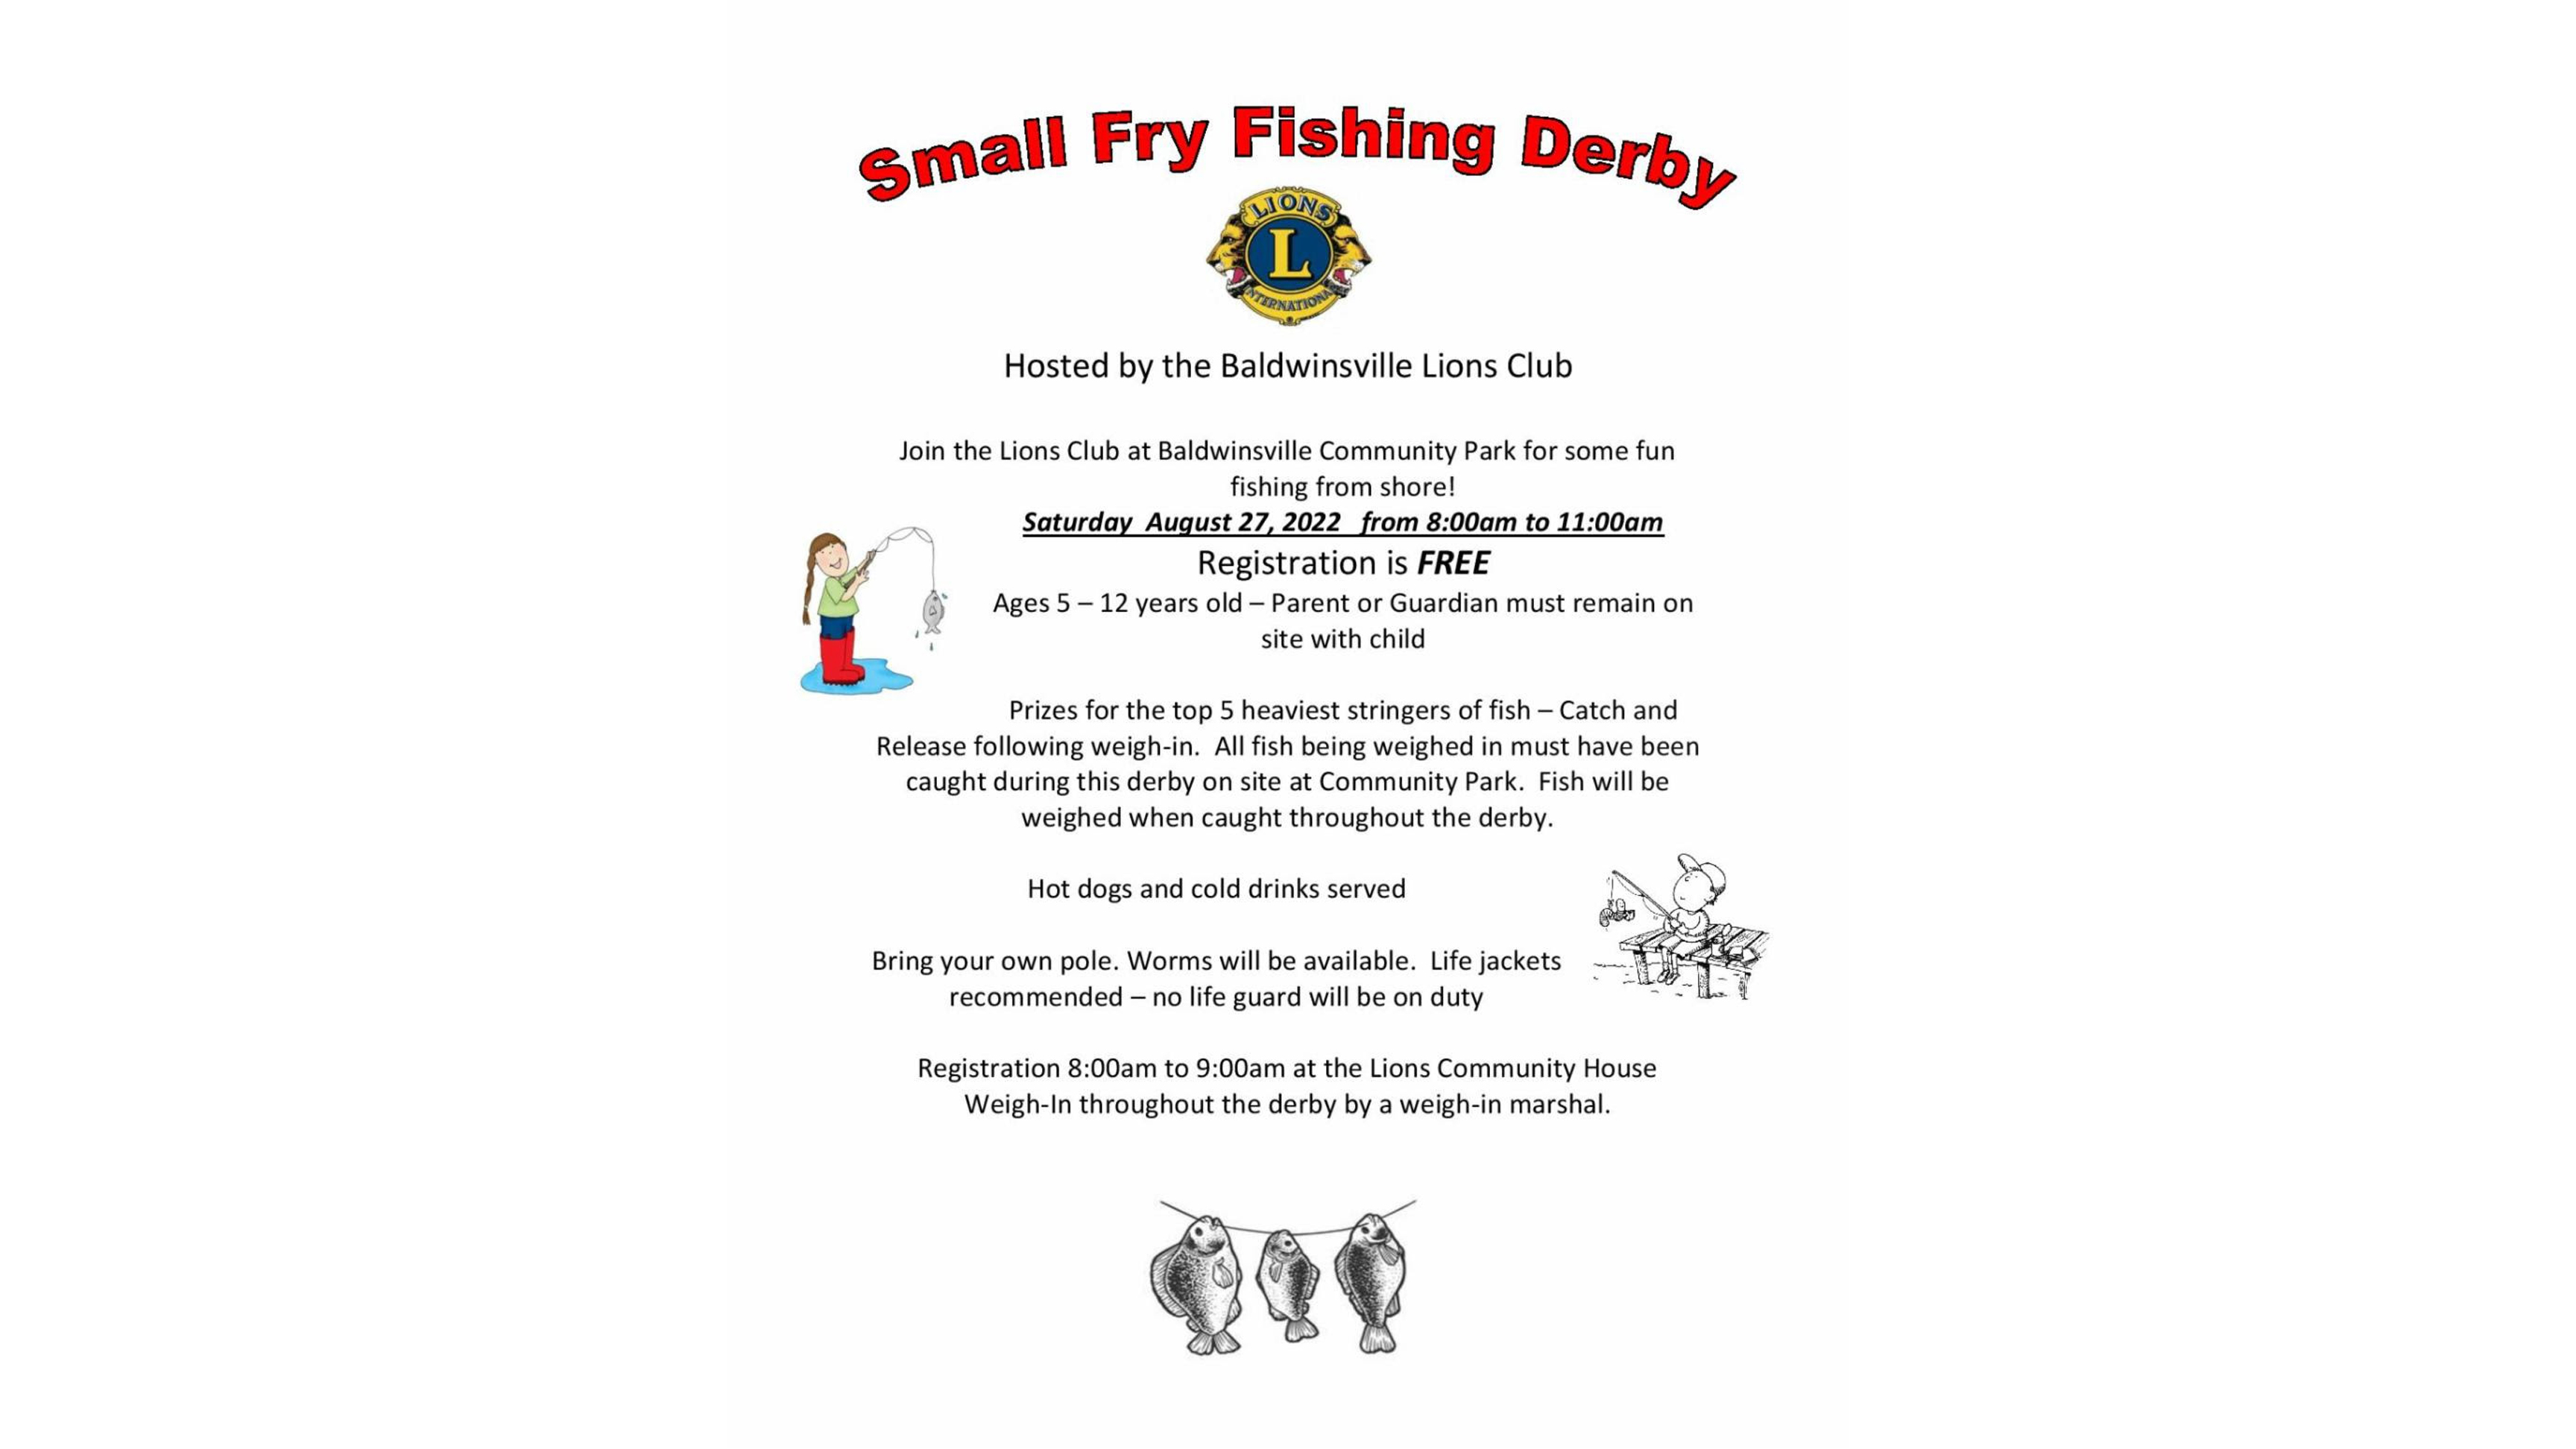 Small Fry Fishing Derby